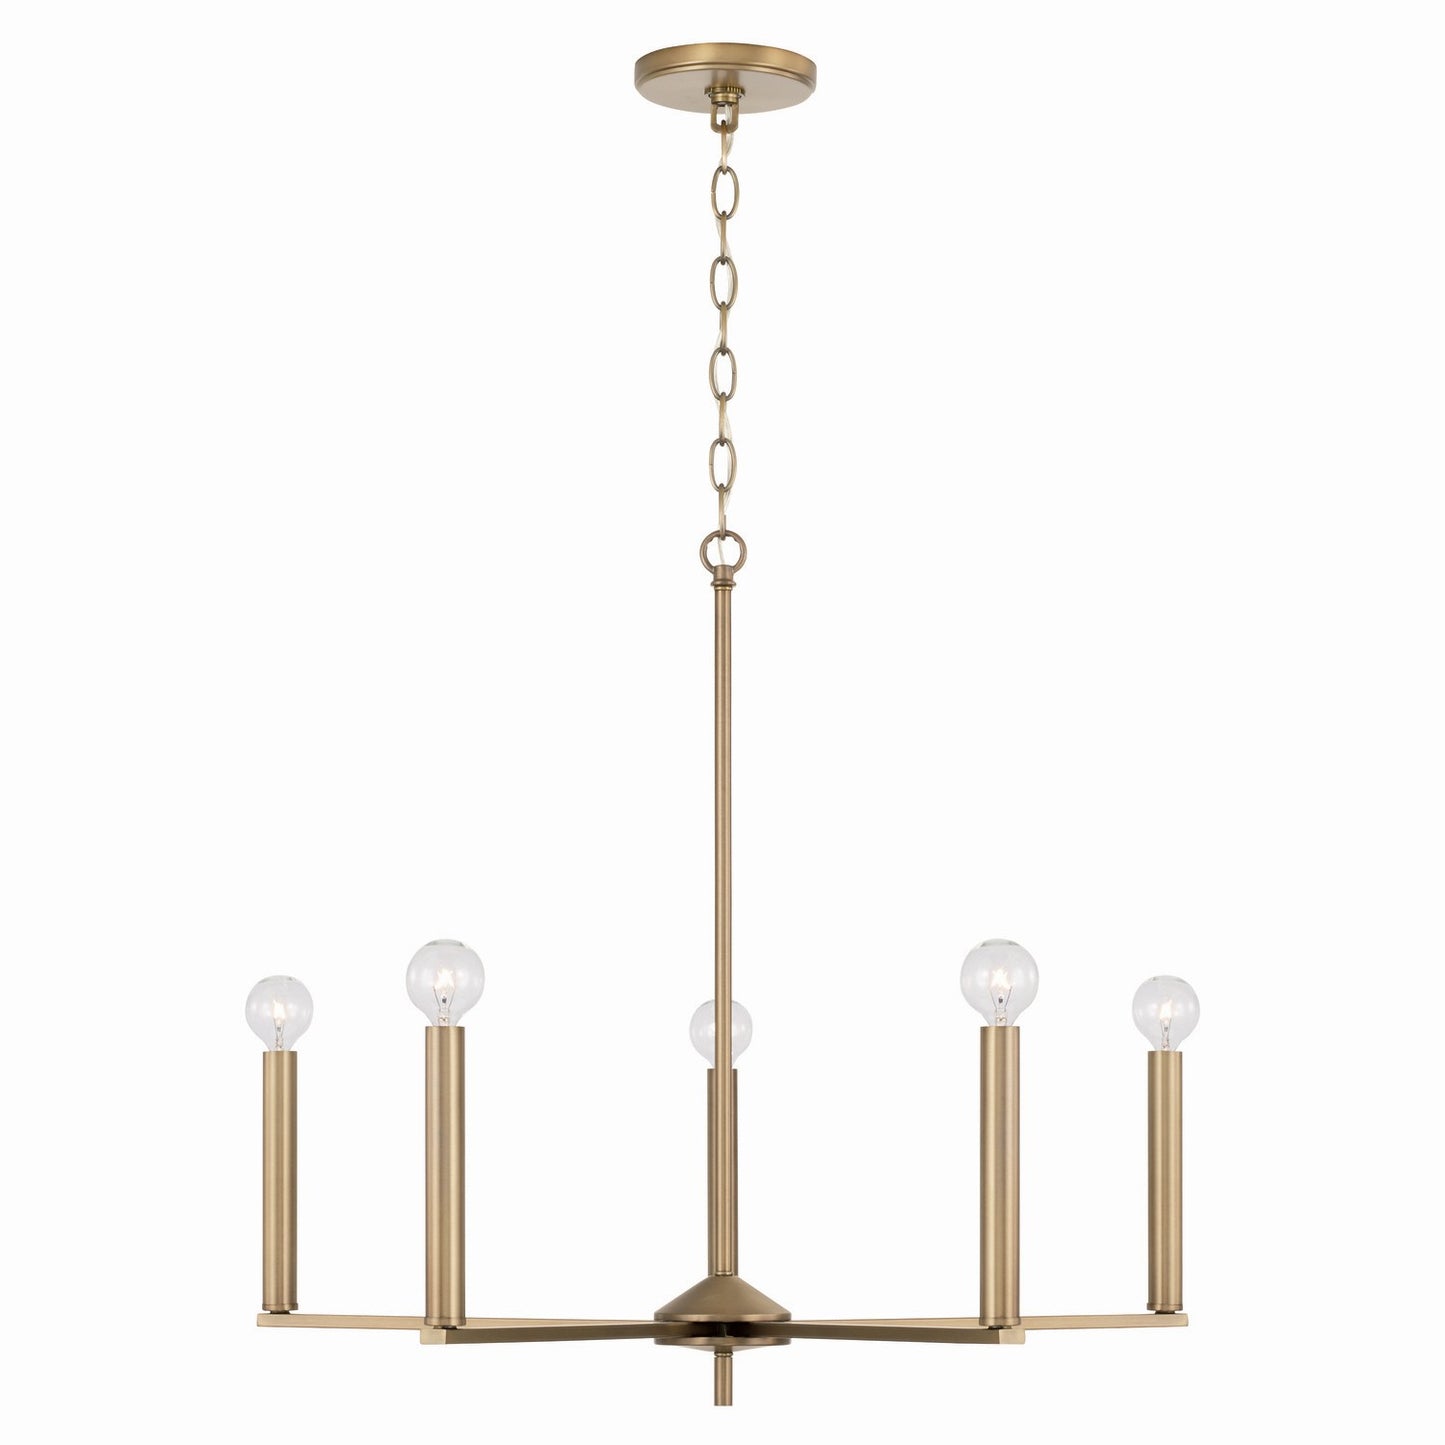 Portman Five Light Chandelier by Capital Lighting in Aged Brass Finish (448651AD)